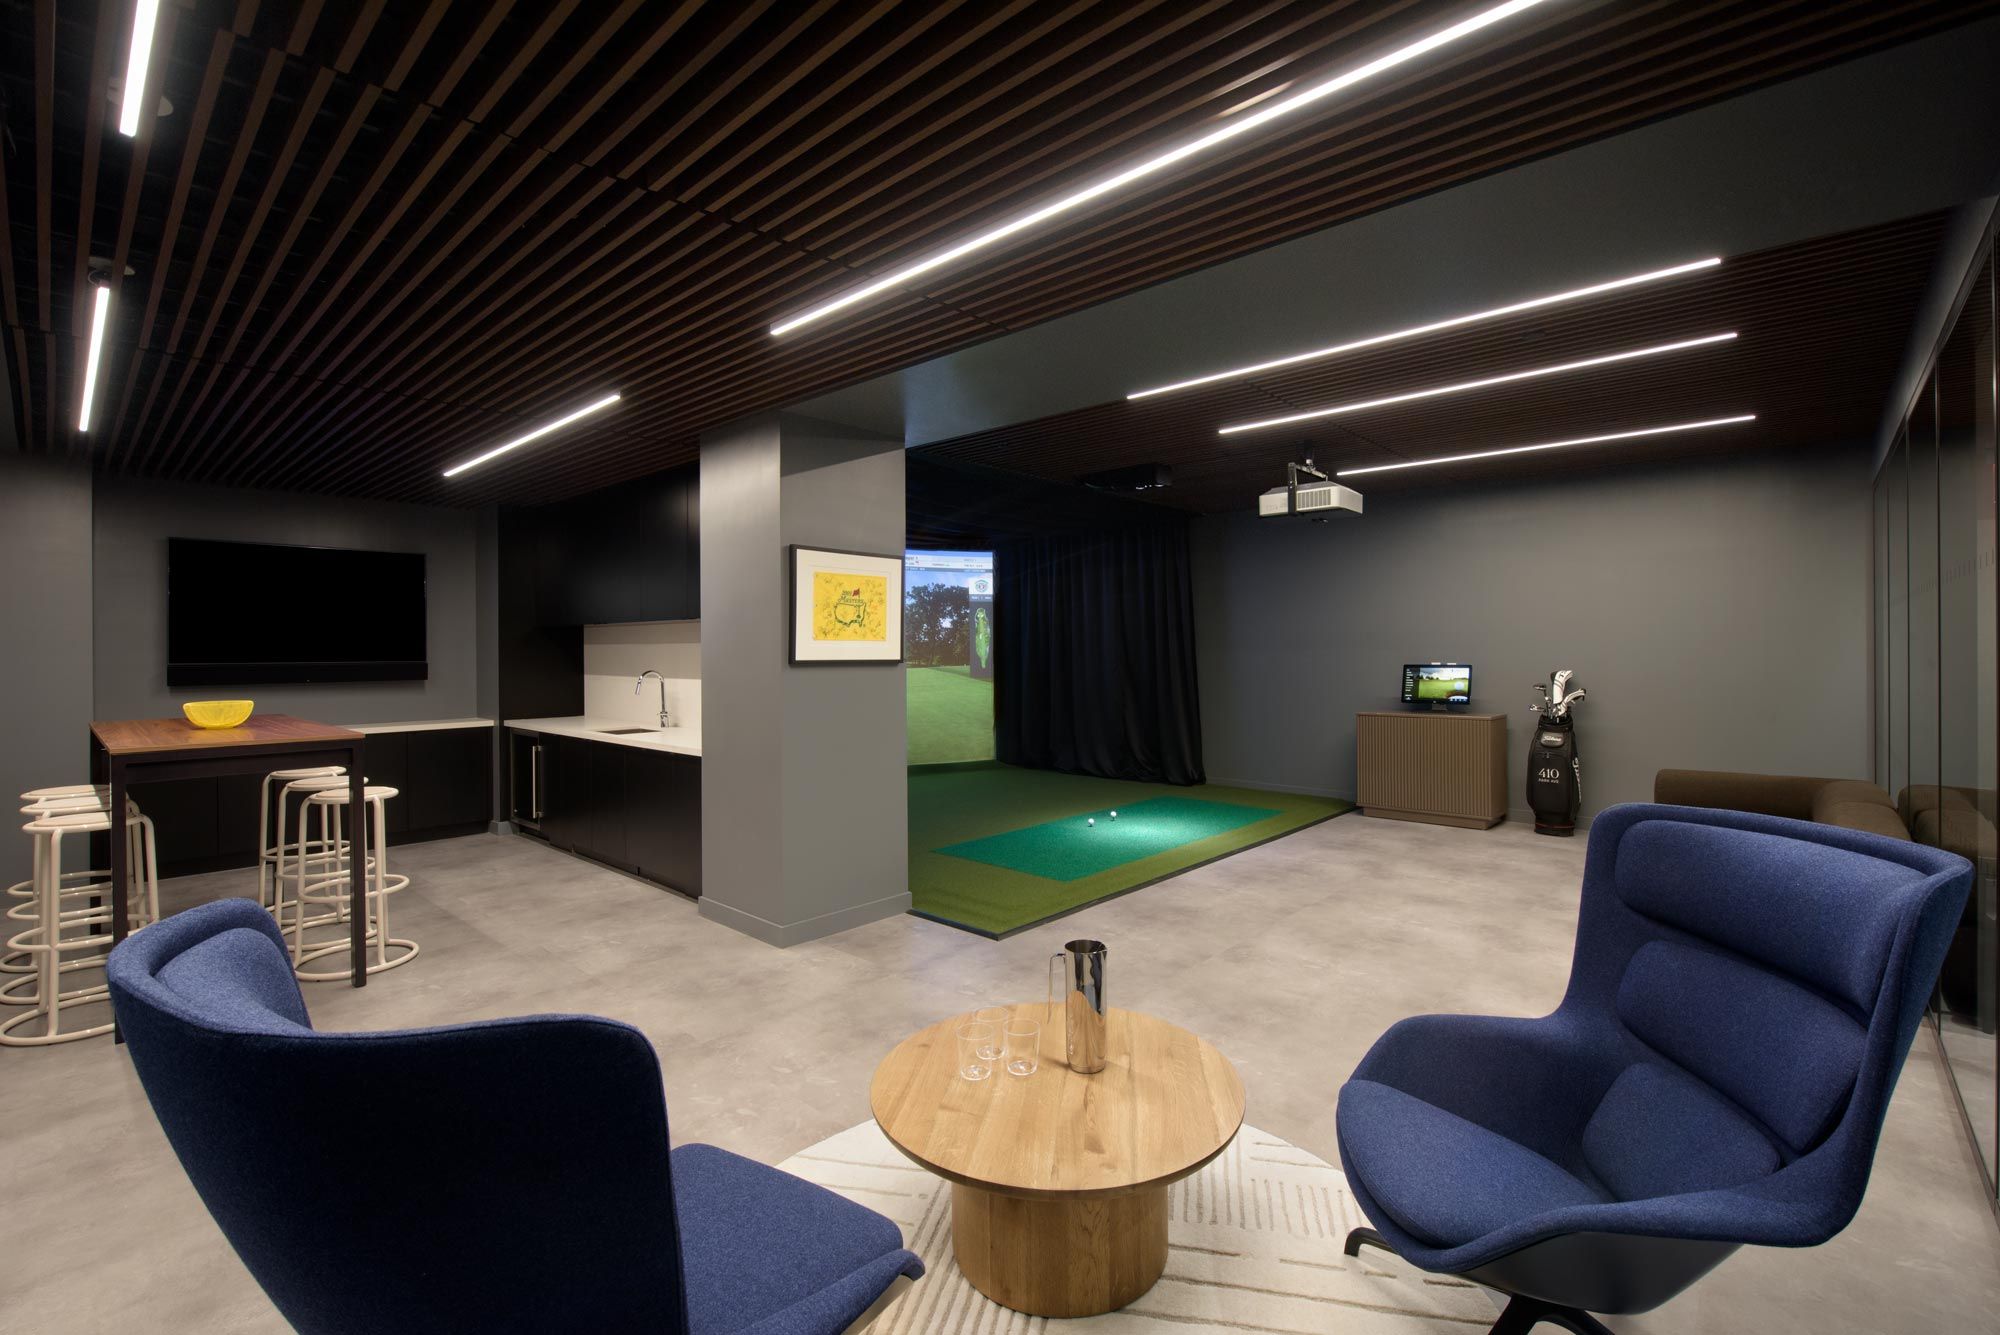 410 Park Avenue’s indoor golf simulator and a private lounge